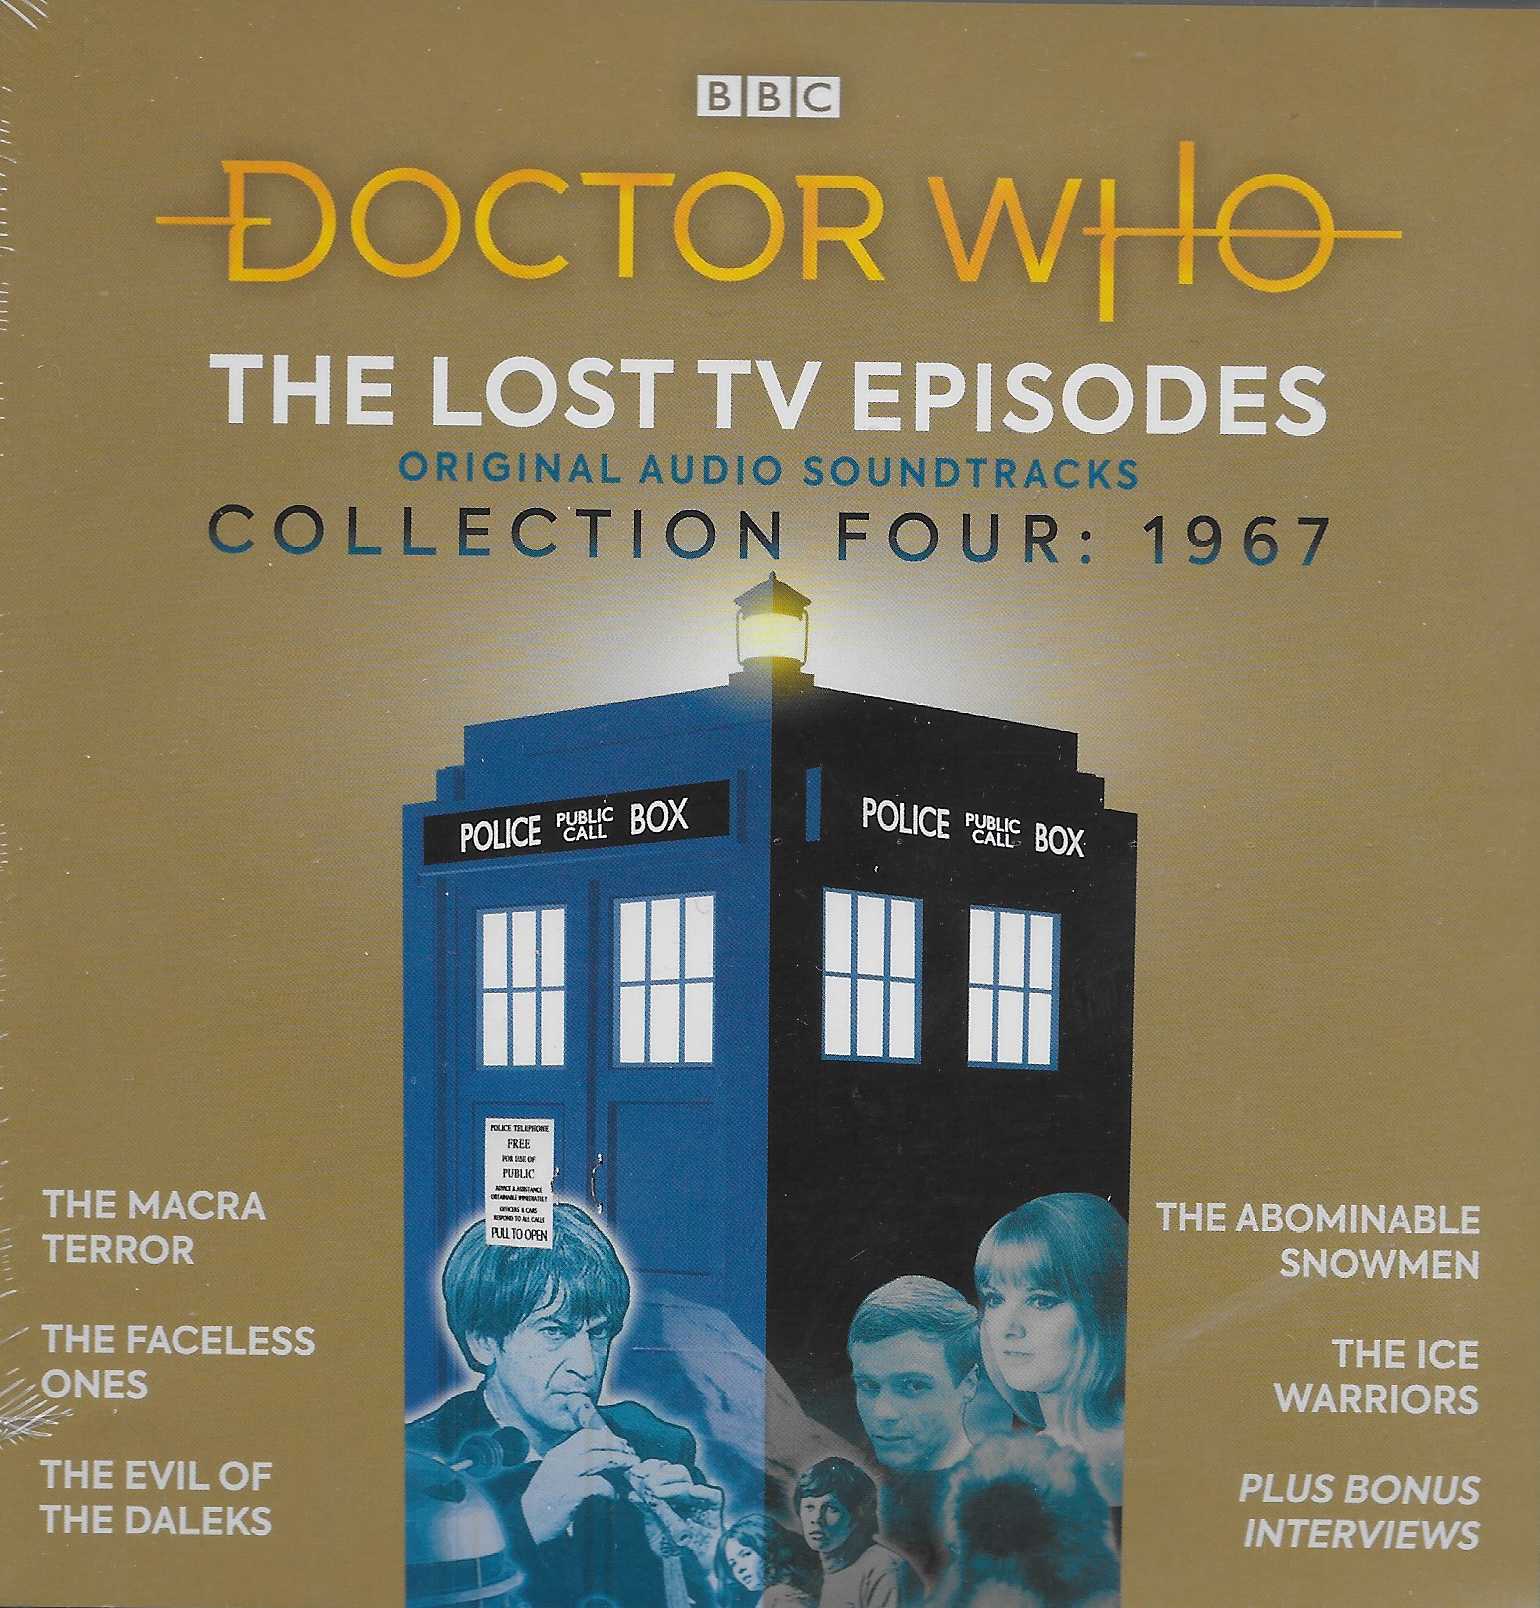 Picture of Doctor Who - The lost TV episodes - Collection four: 1967 by artist Various from the BBC cds - Records and Tapes library